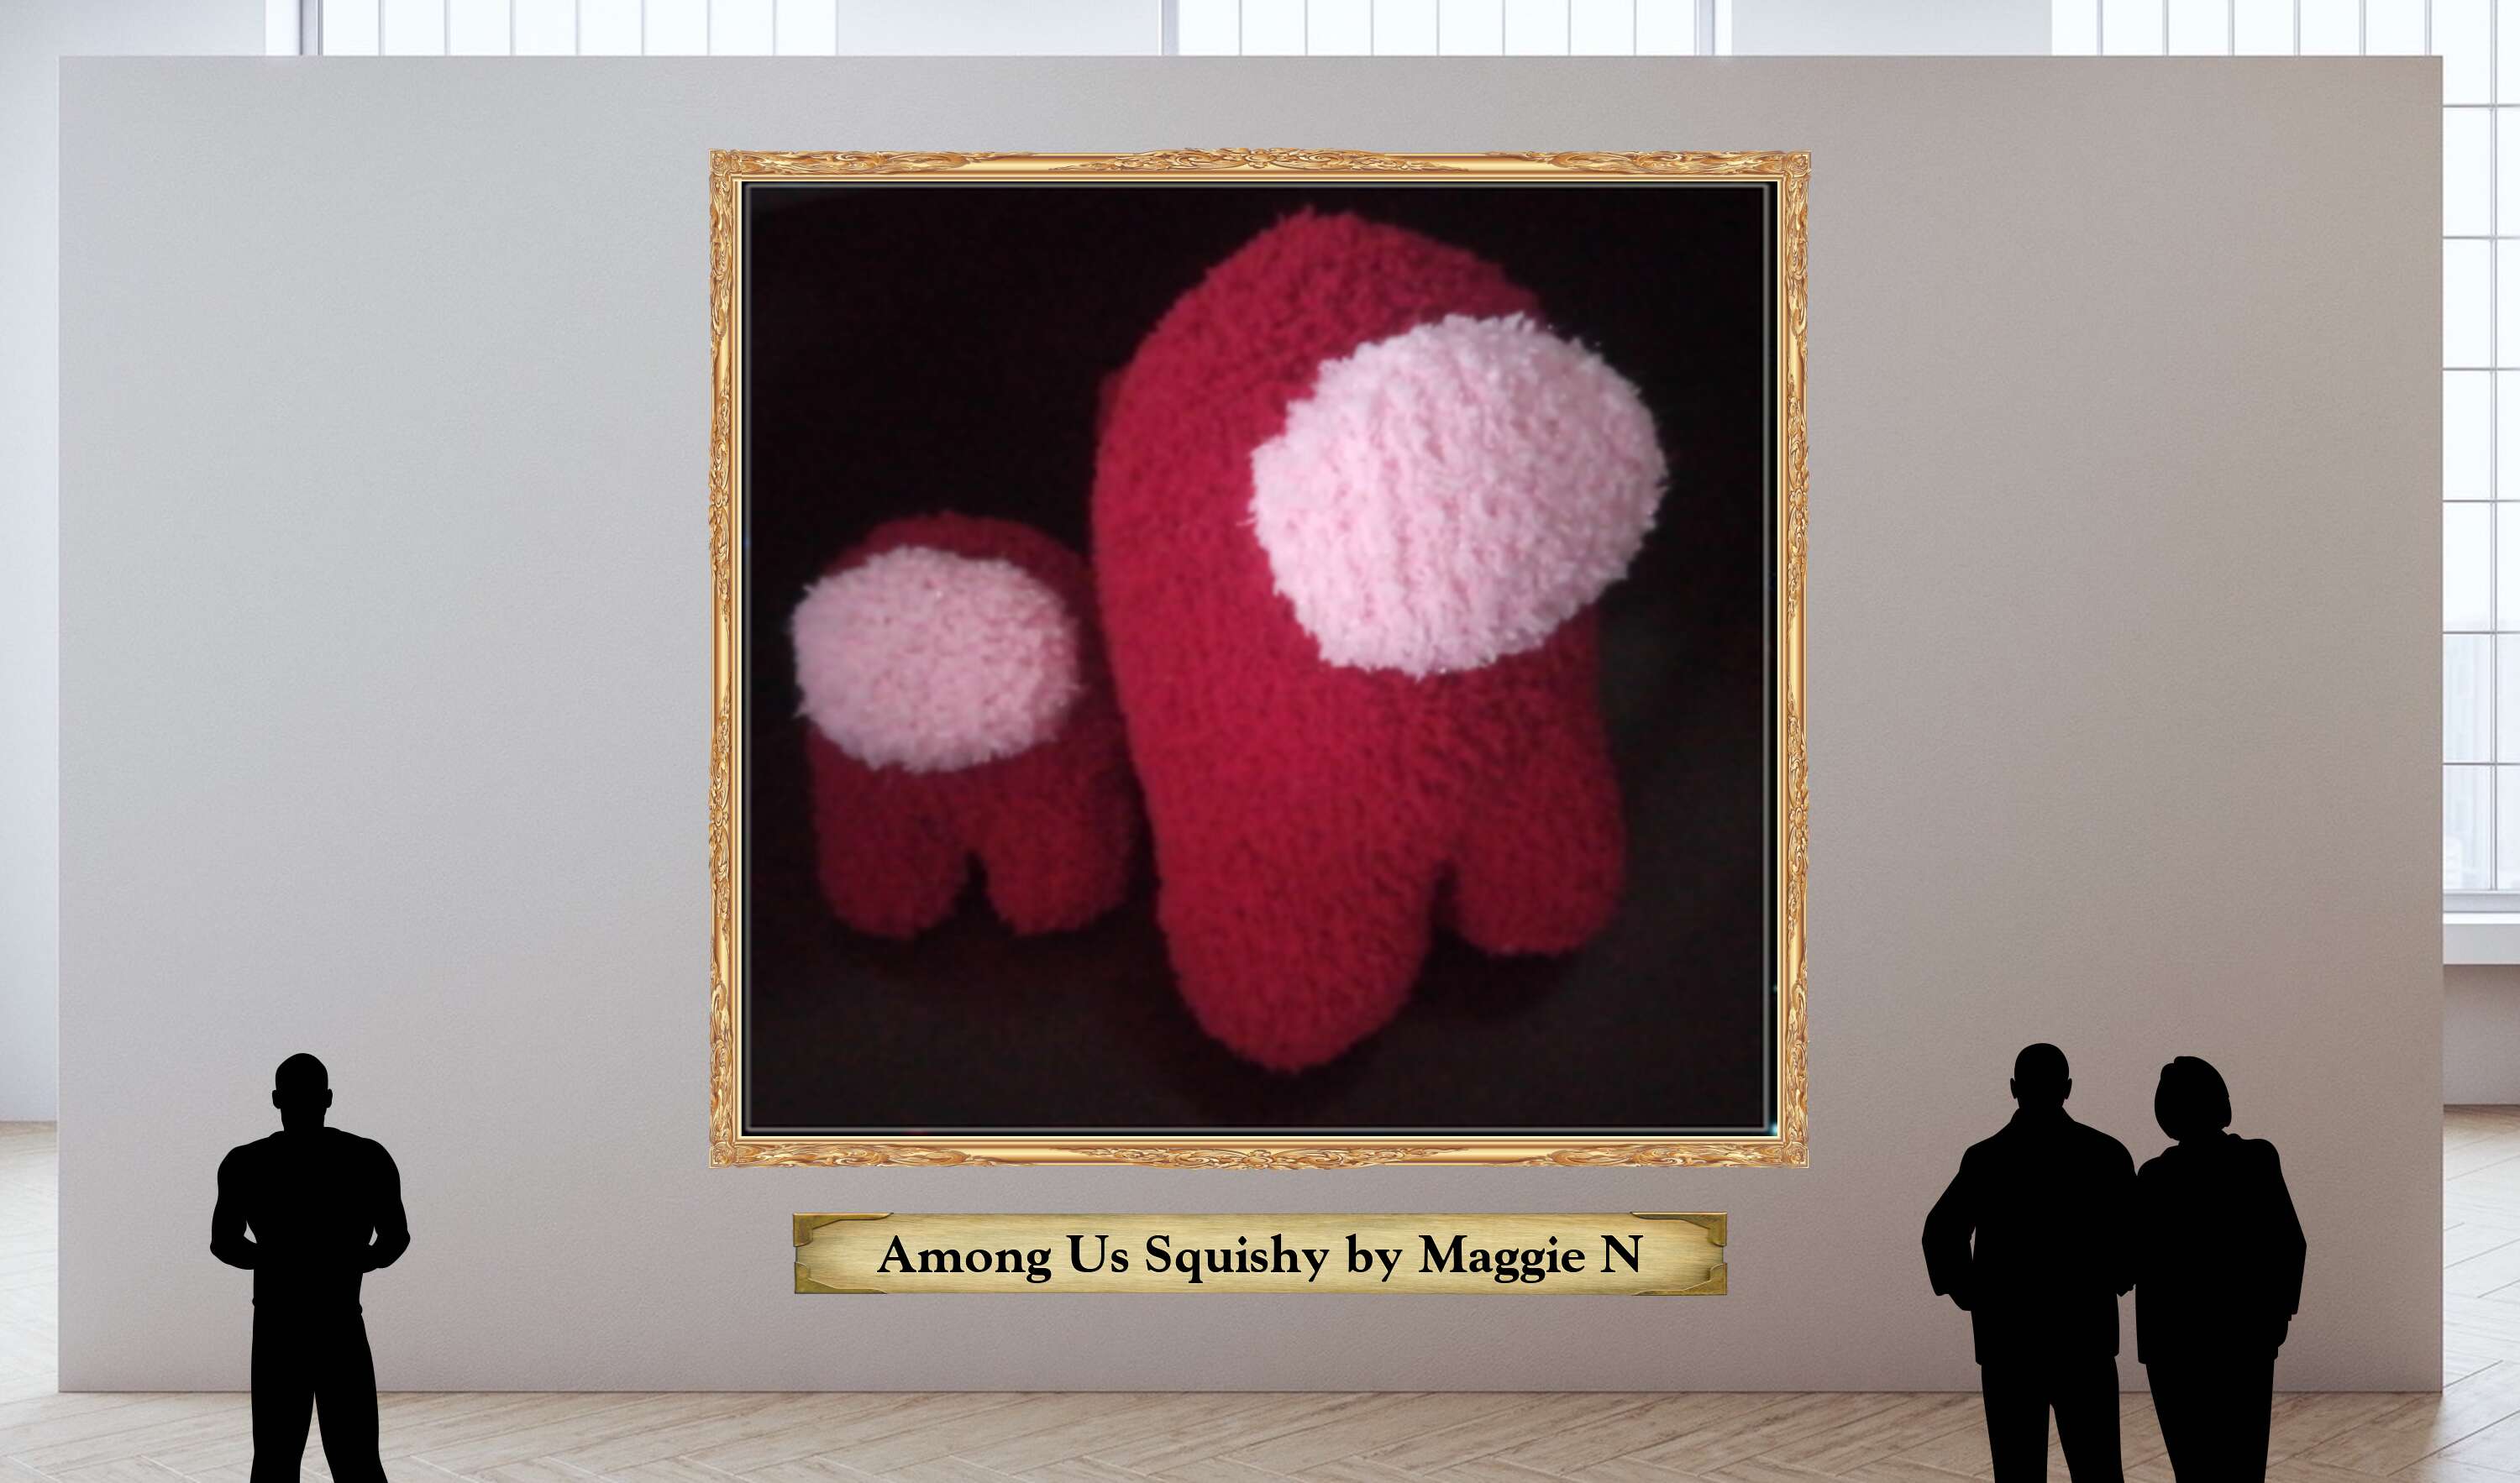 Among Us Squishy by Maggie N